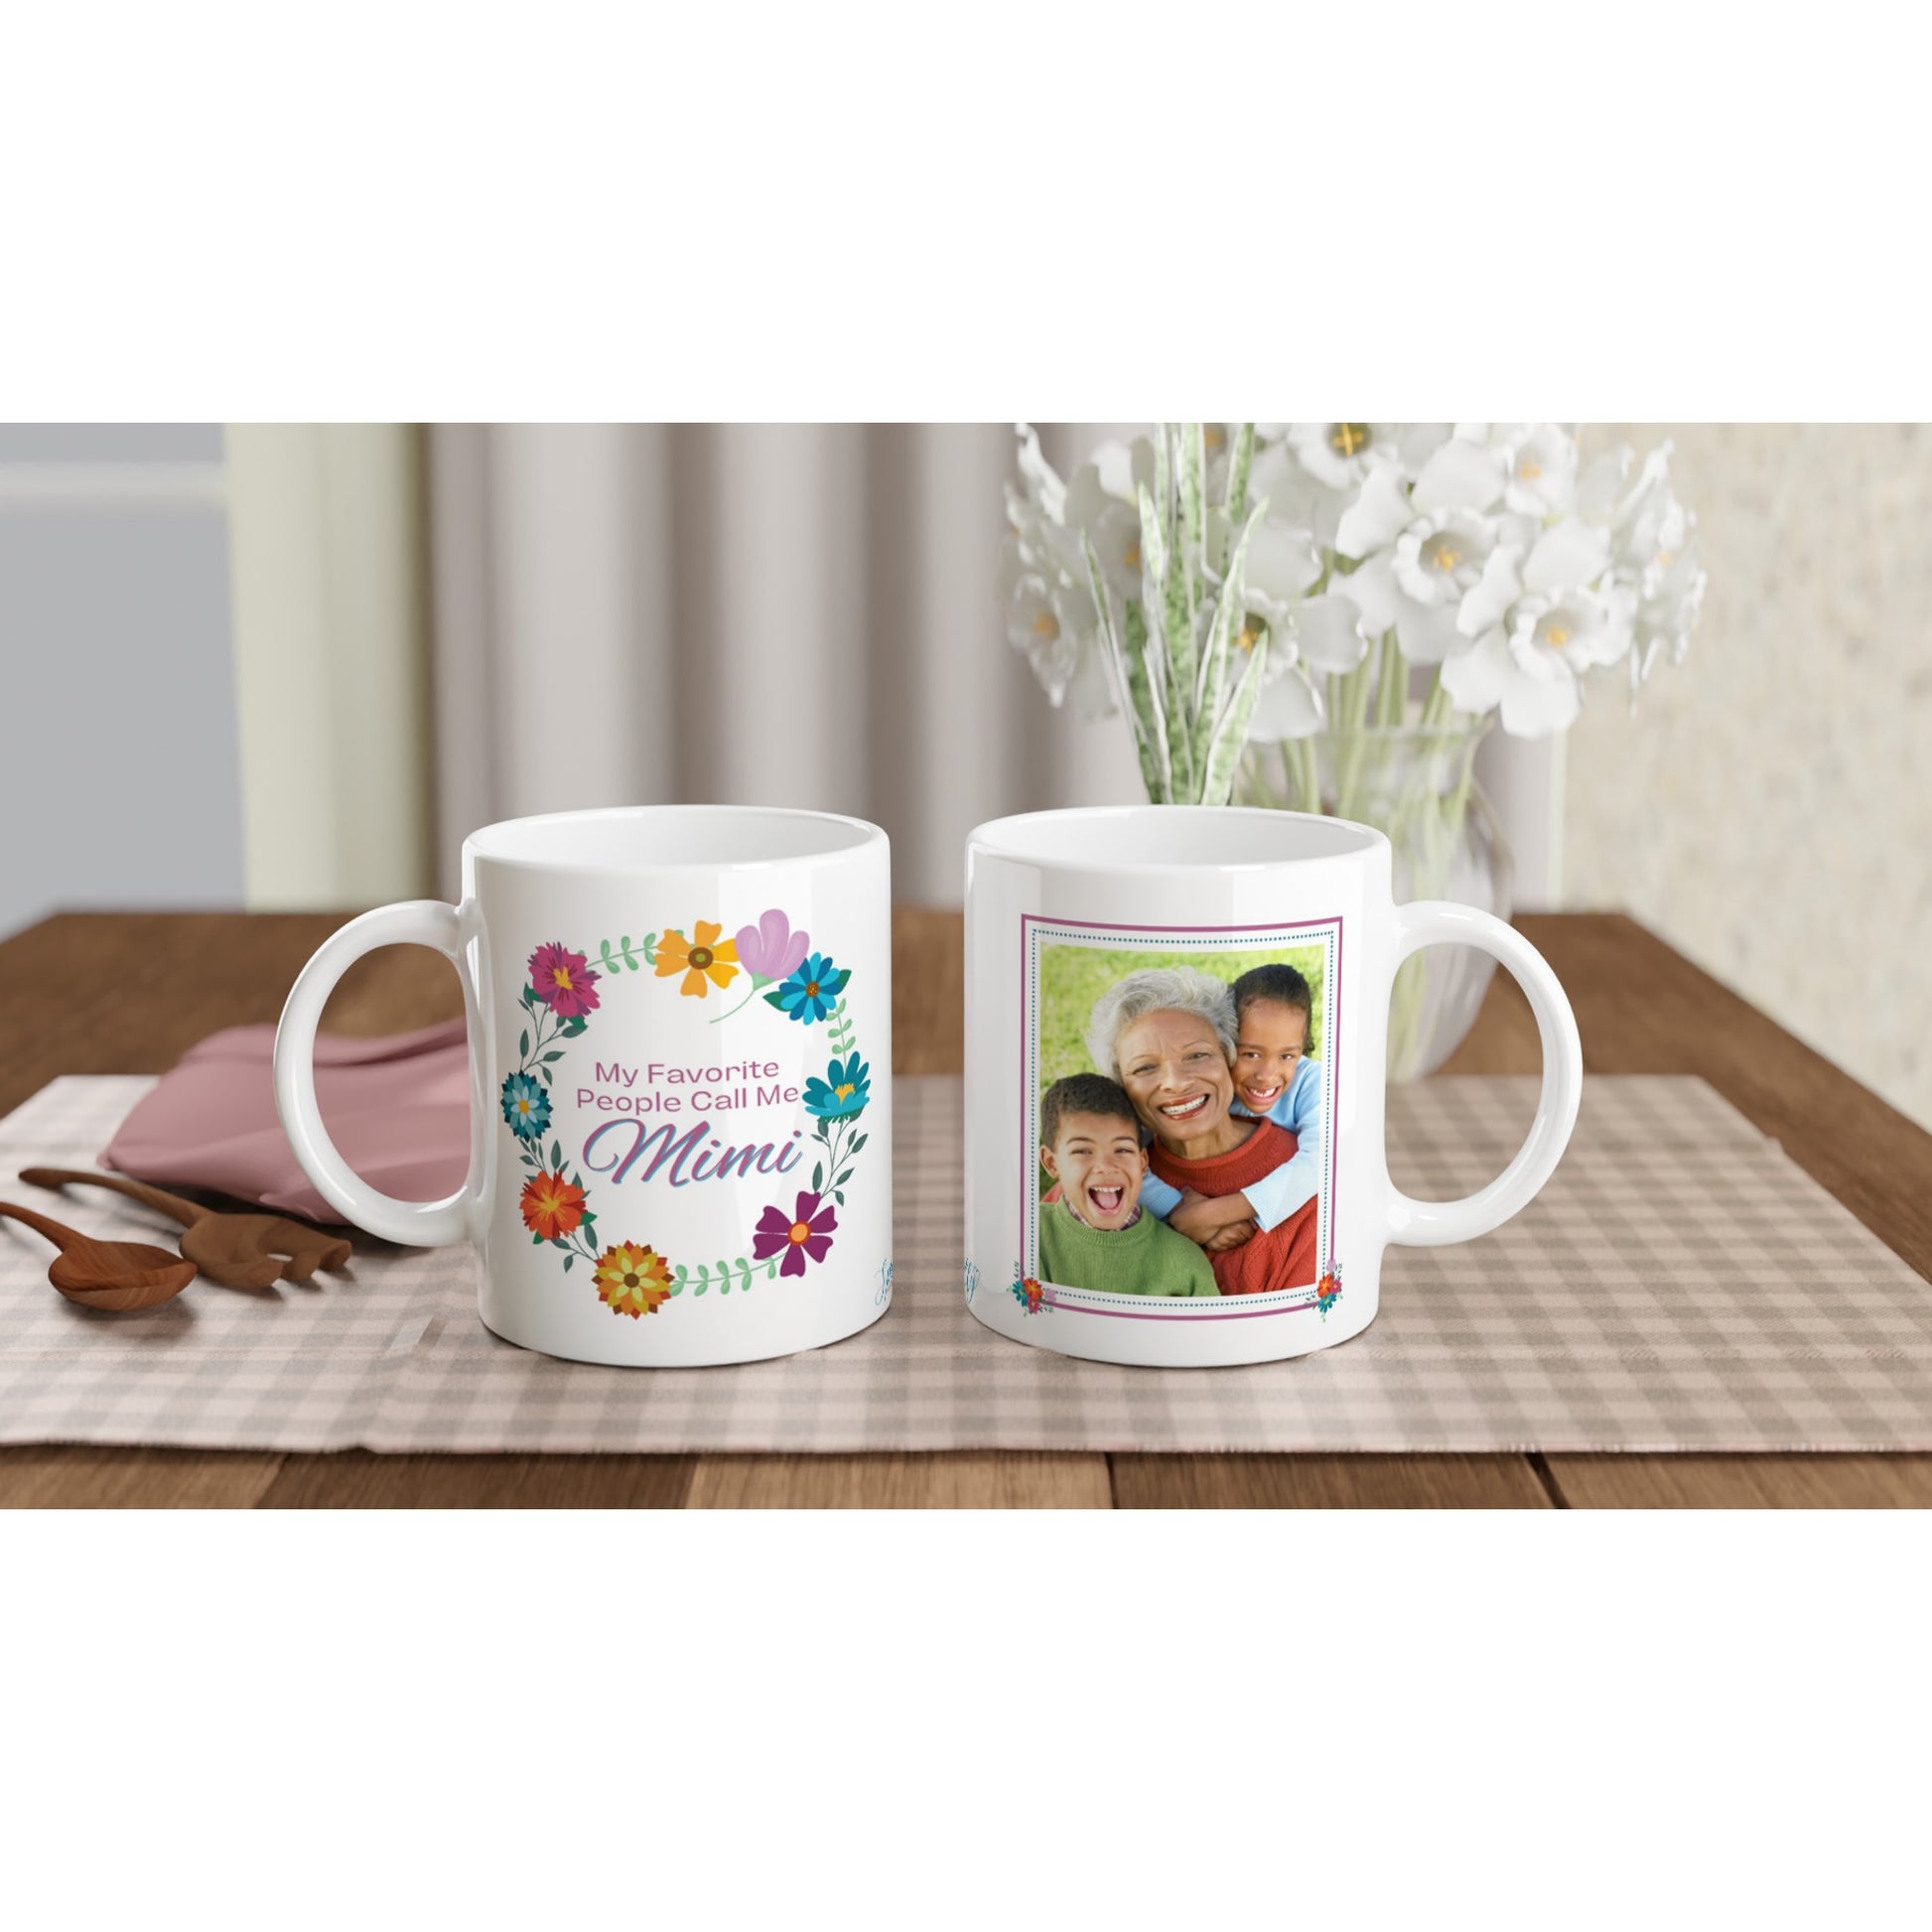 "My Favorite People Call Me Mimi" Customizable Photo 11 oz. Mug front and back view sitting on table